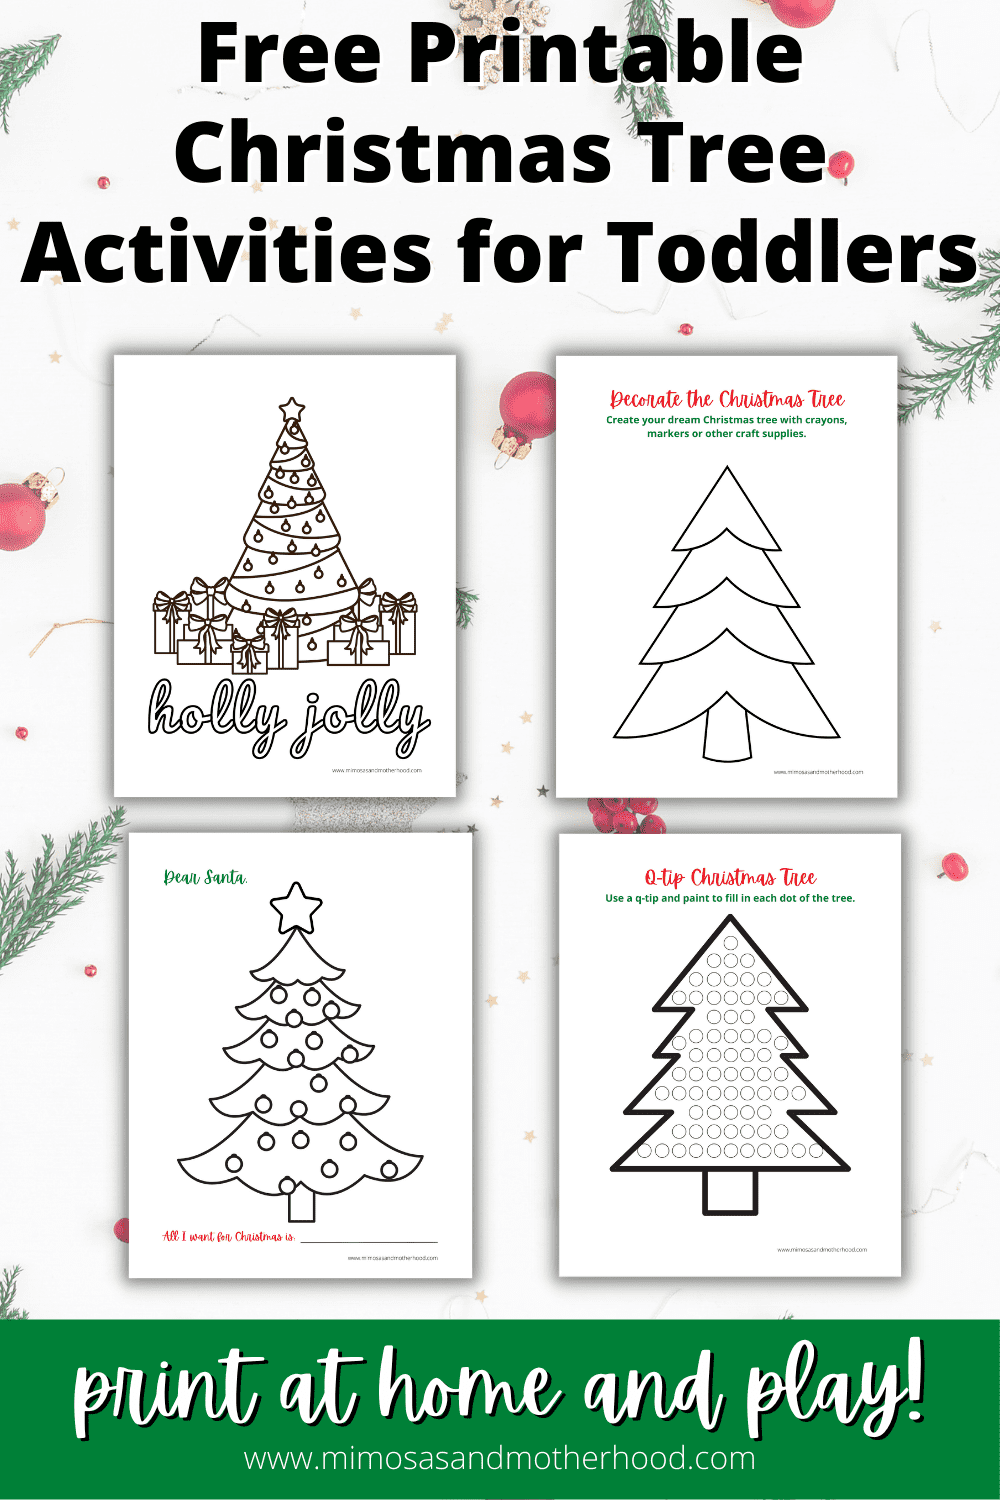 Free Printable Christmas Tree Activities for Toddlers